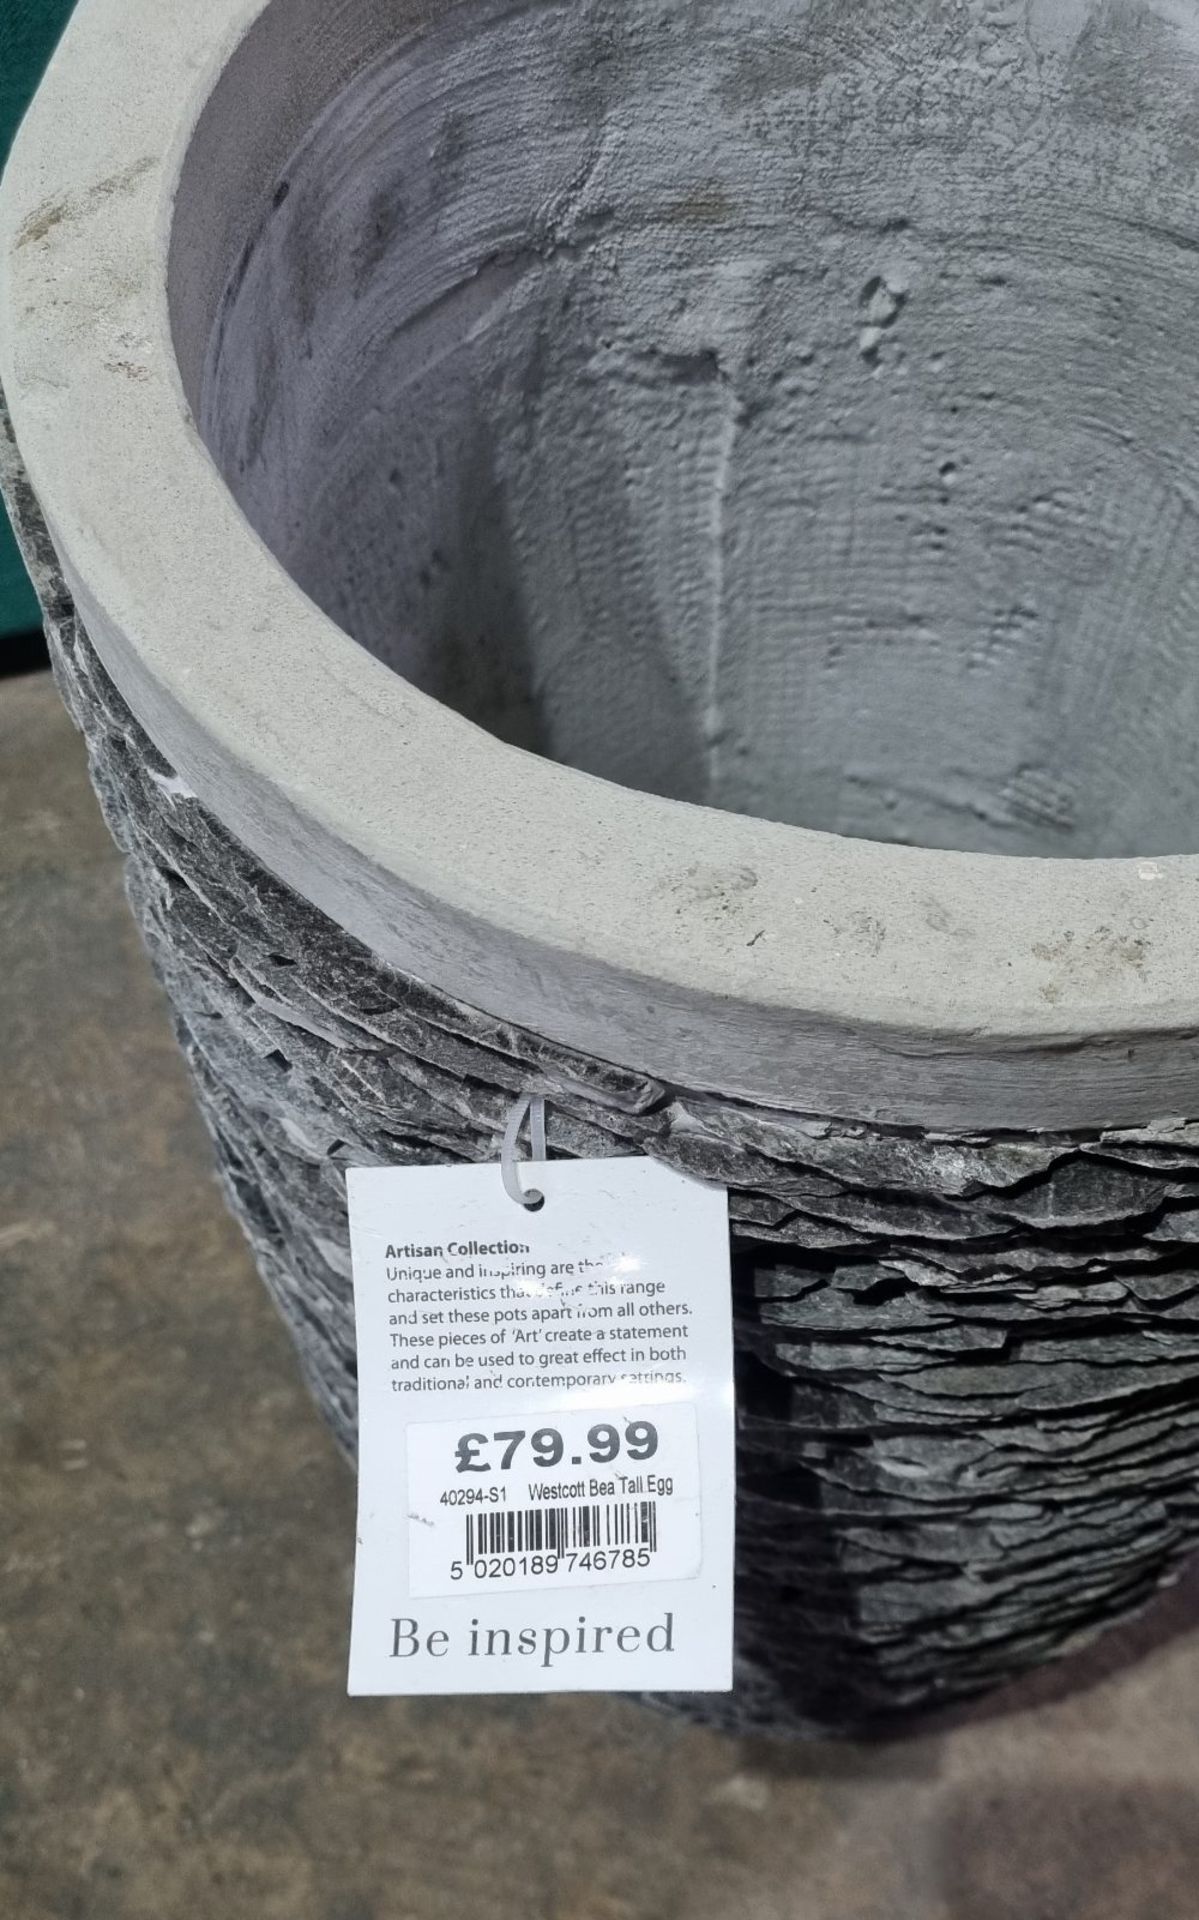 Mims Artisan Collection Westcott BEA 40294-S1 Tall Slate Egg Planter | 550mm x 350mm | RRP £79.99 - Image 5 of 5